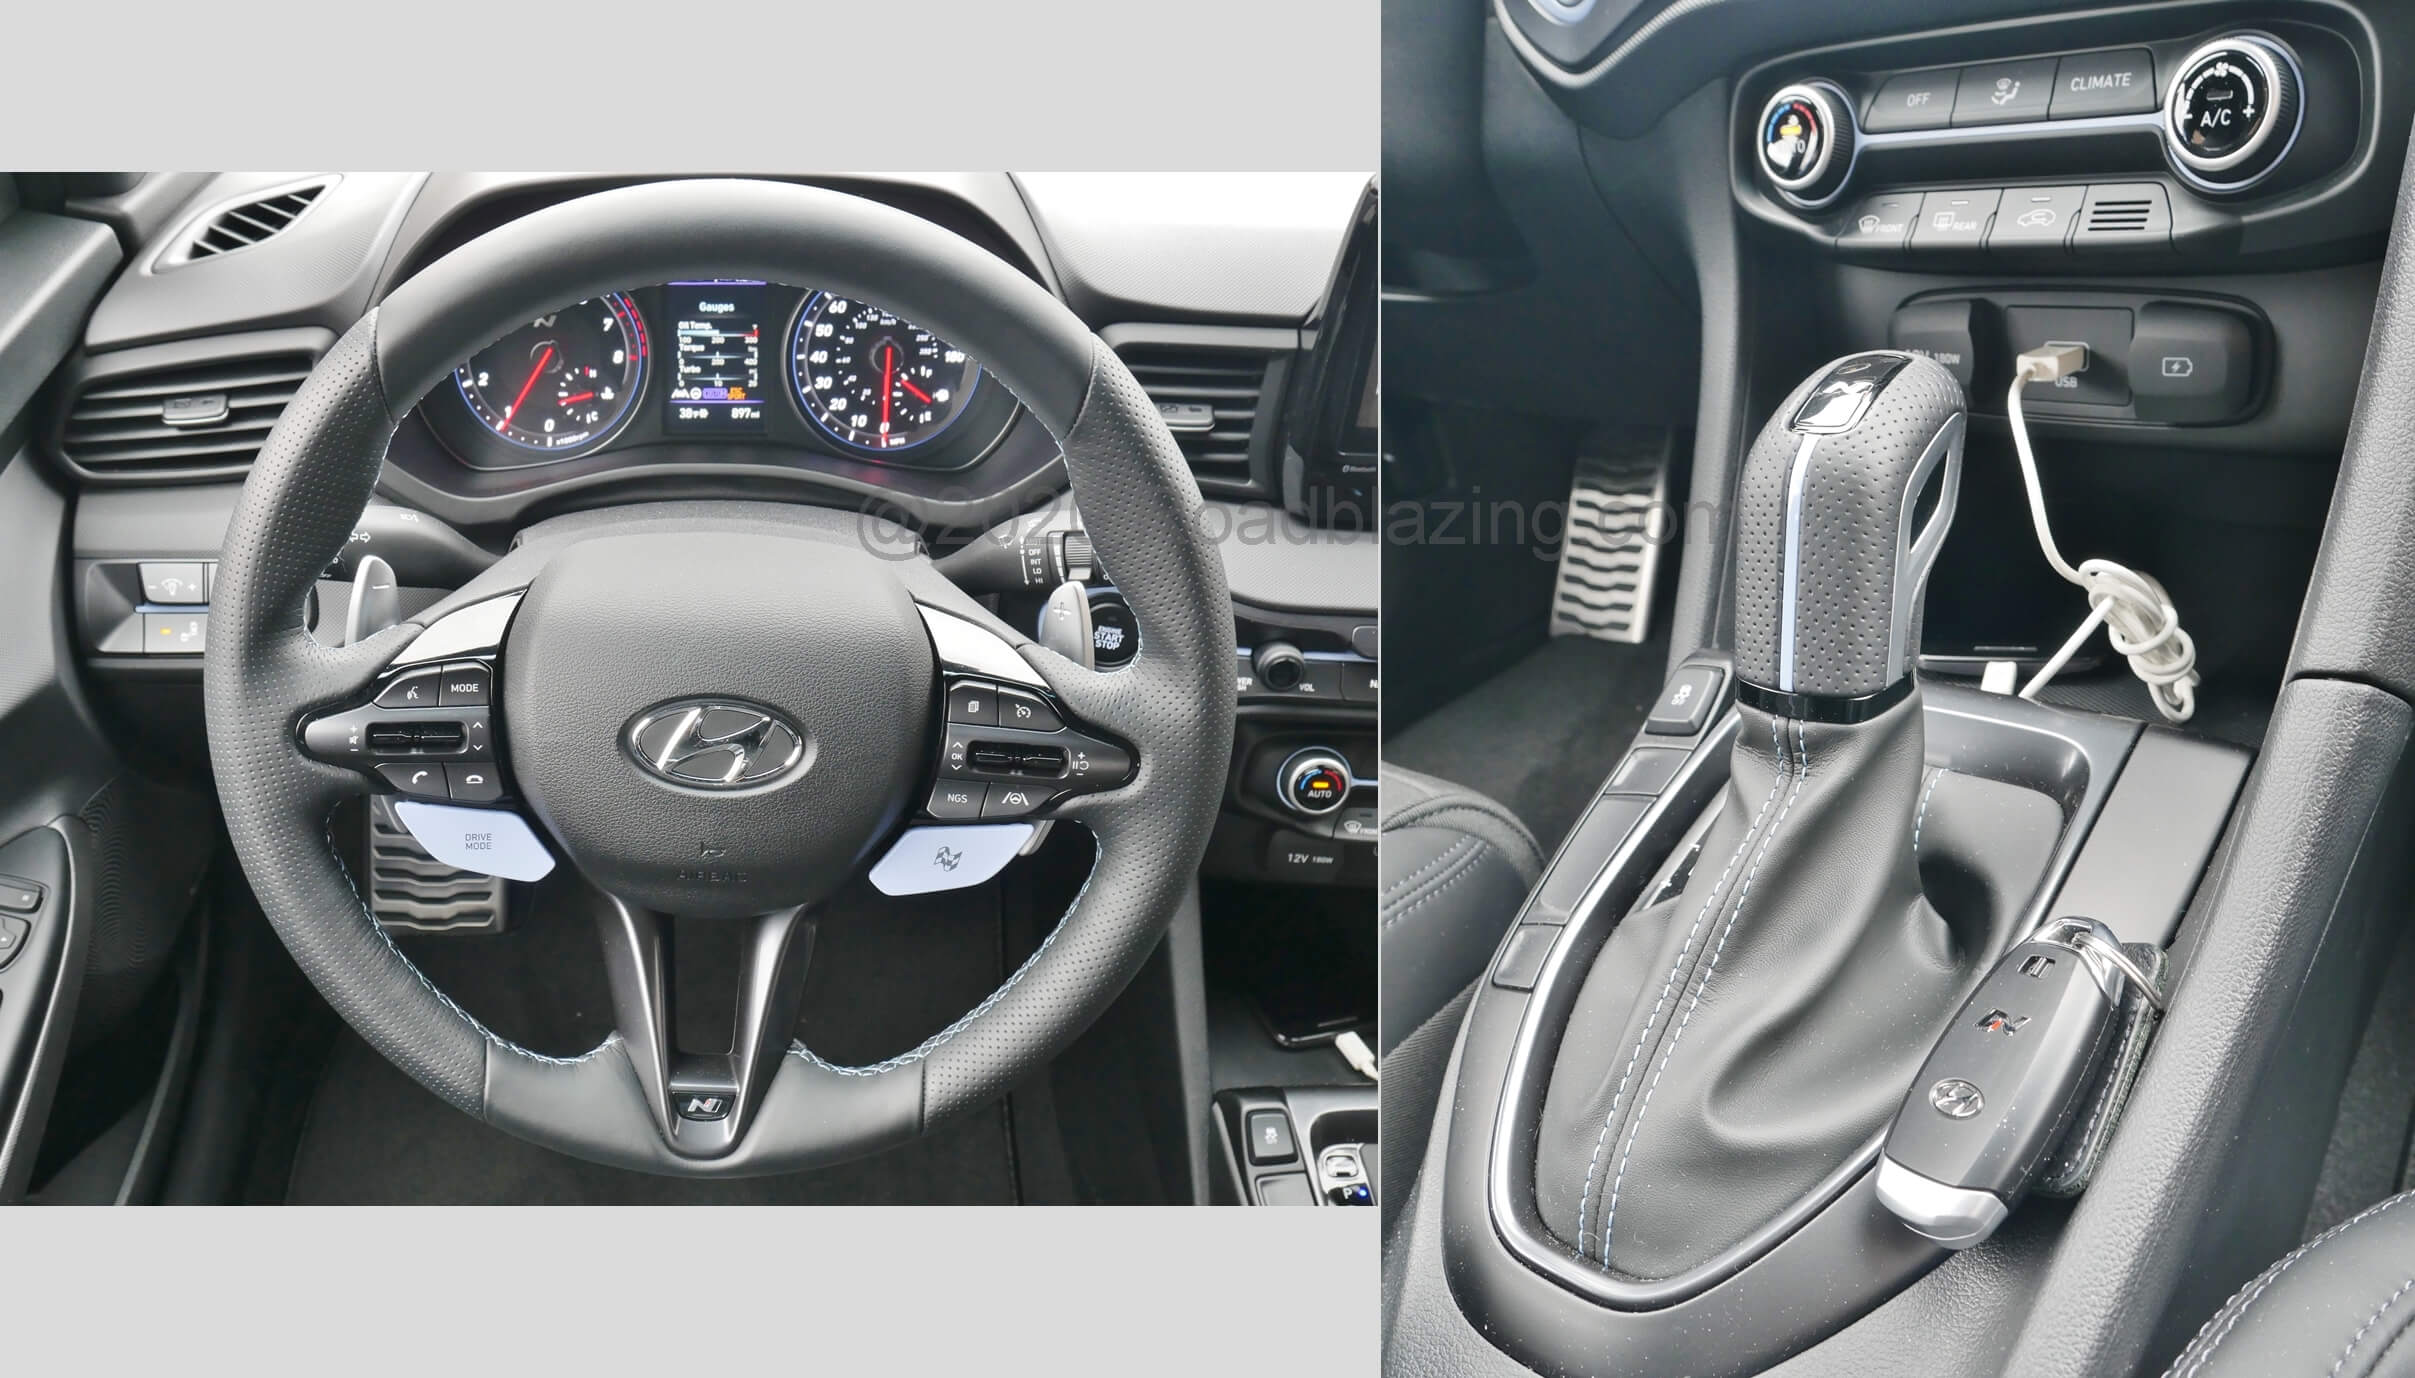 2021 Hyundai Veloster N DCT: "N" Sport steering wheel w/ shift paddles & horizontal spoke hanging Drive and N-Mode switches